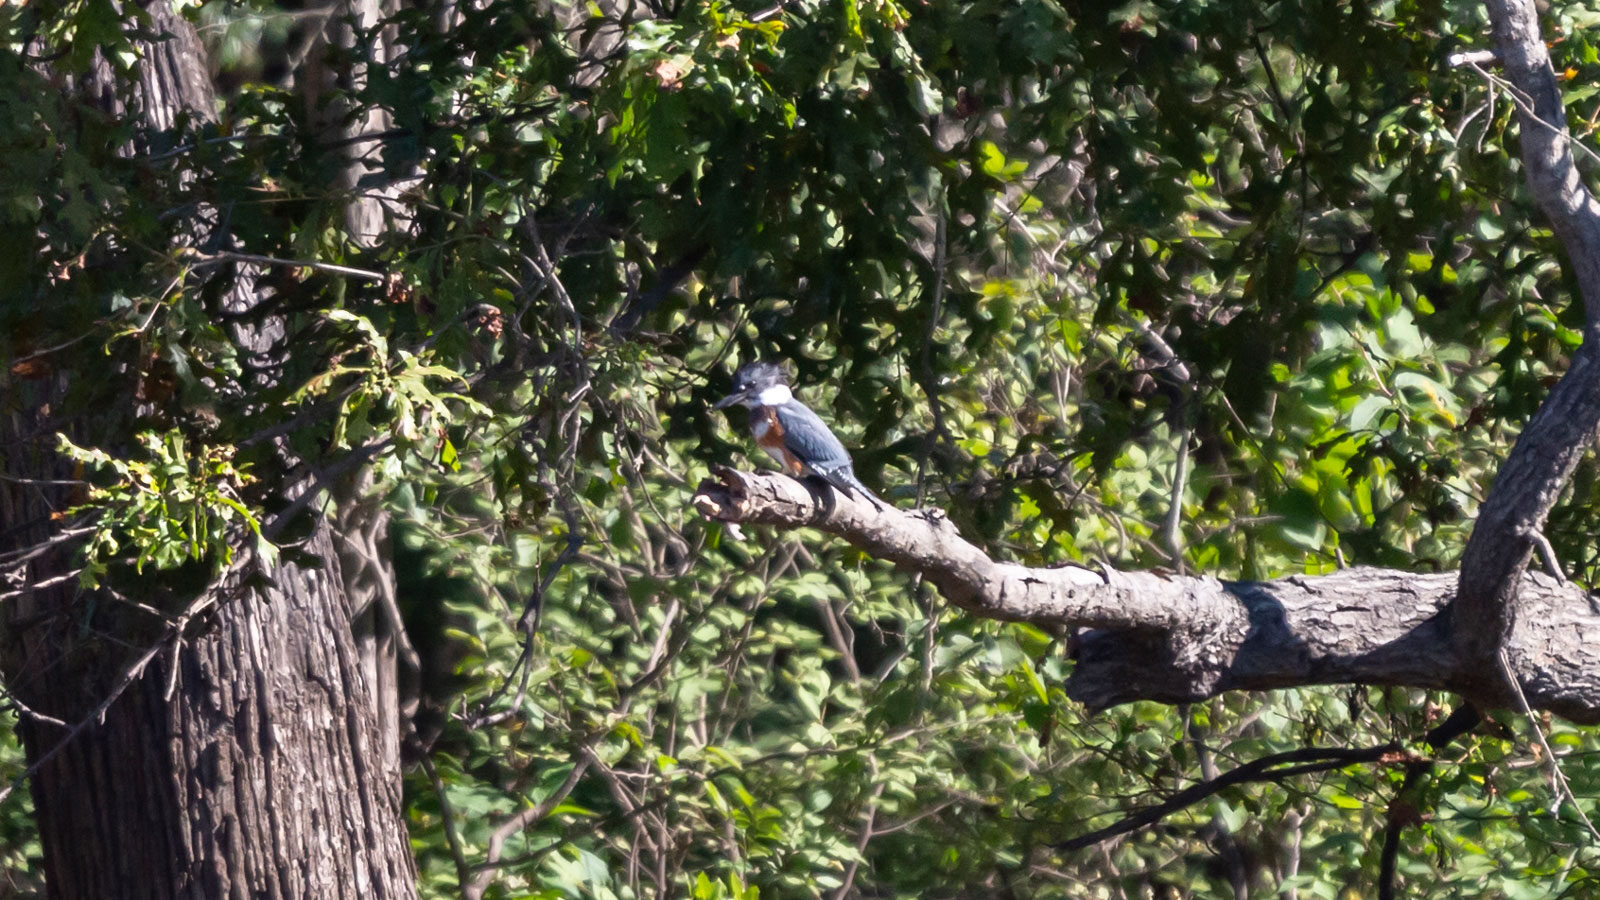 Belted kingfisher perched on a branch